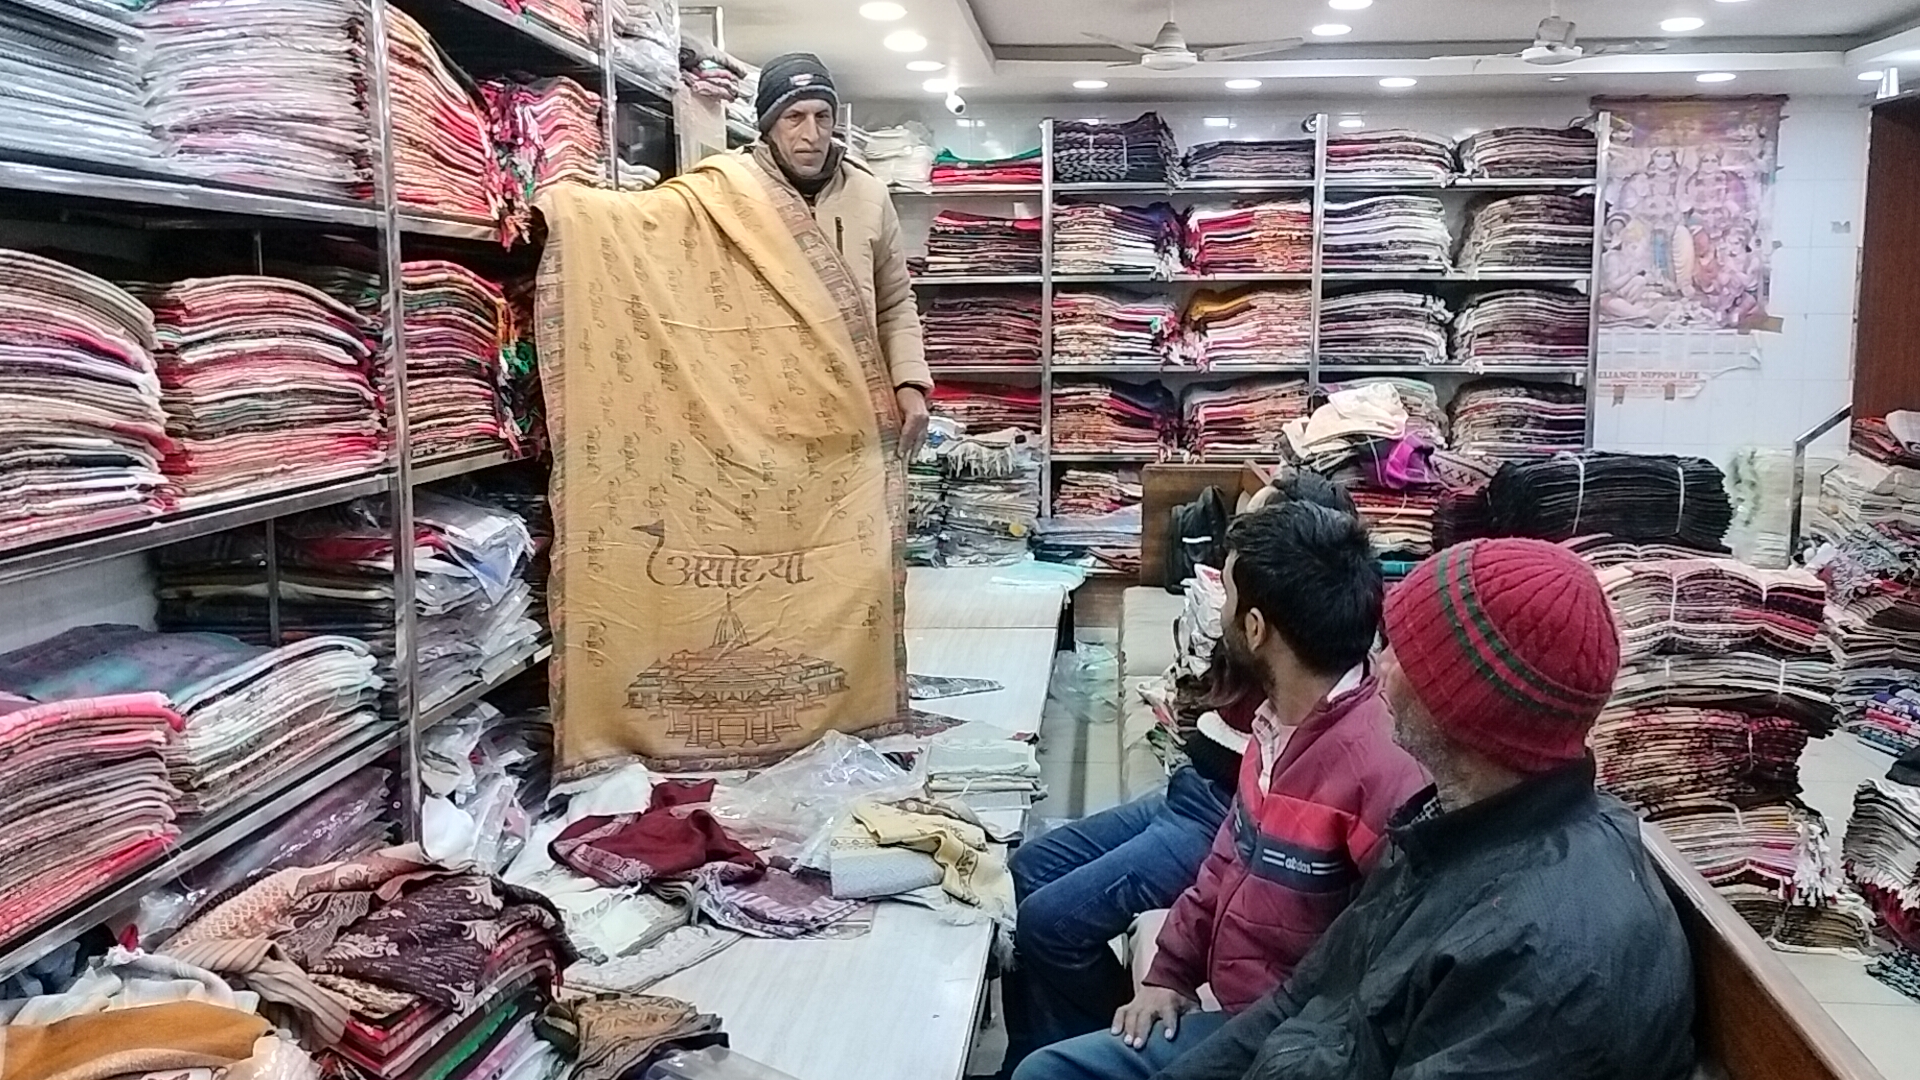 Increased demand for making warm shawls in Ludhiana, orders coming from Ayodhya